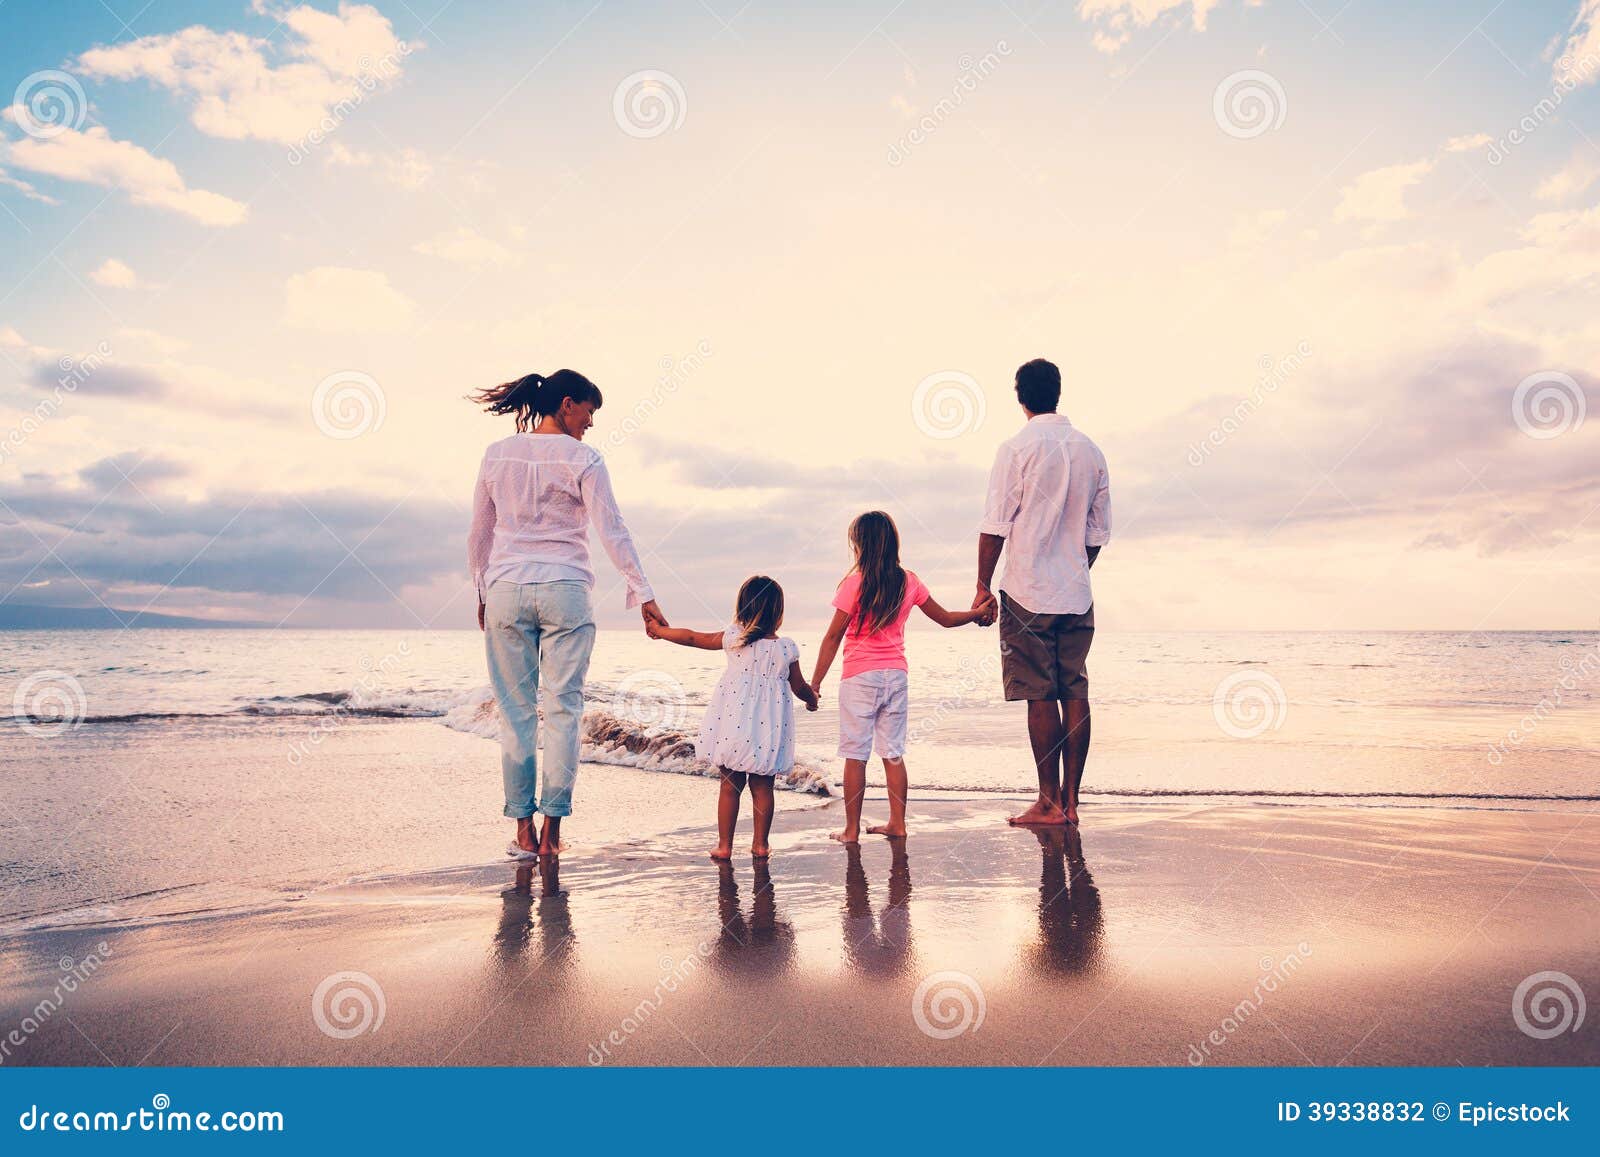 happy family have fun walking on beach at sunset